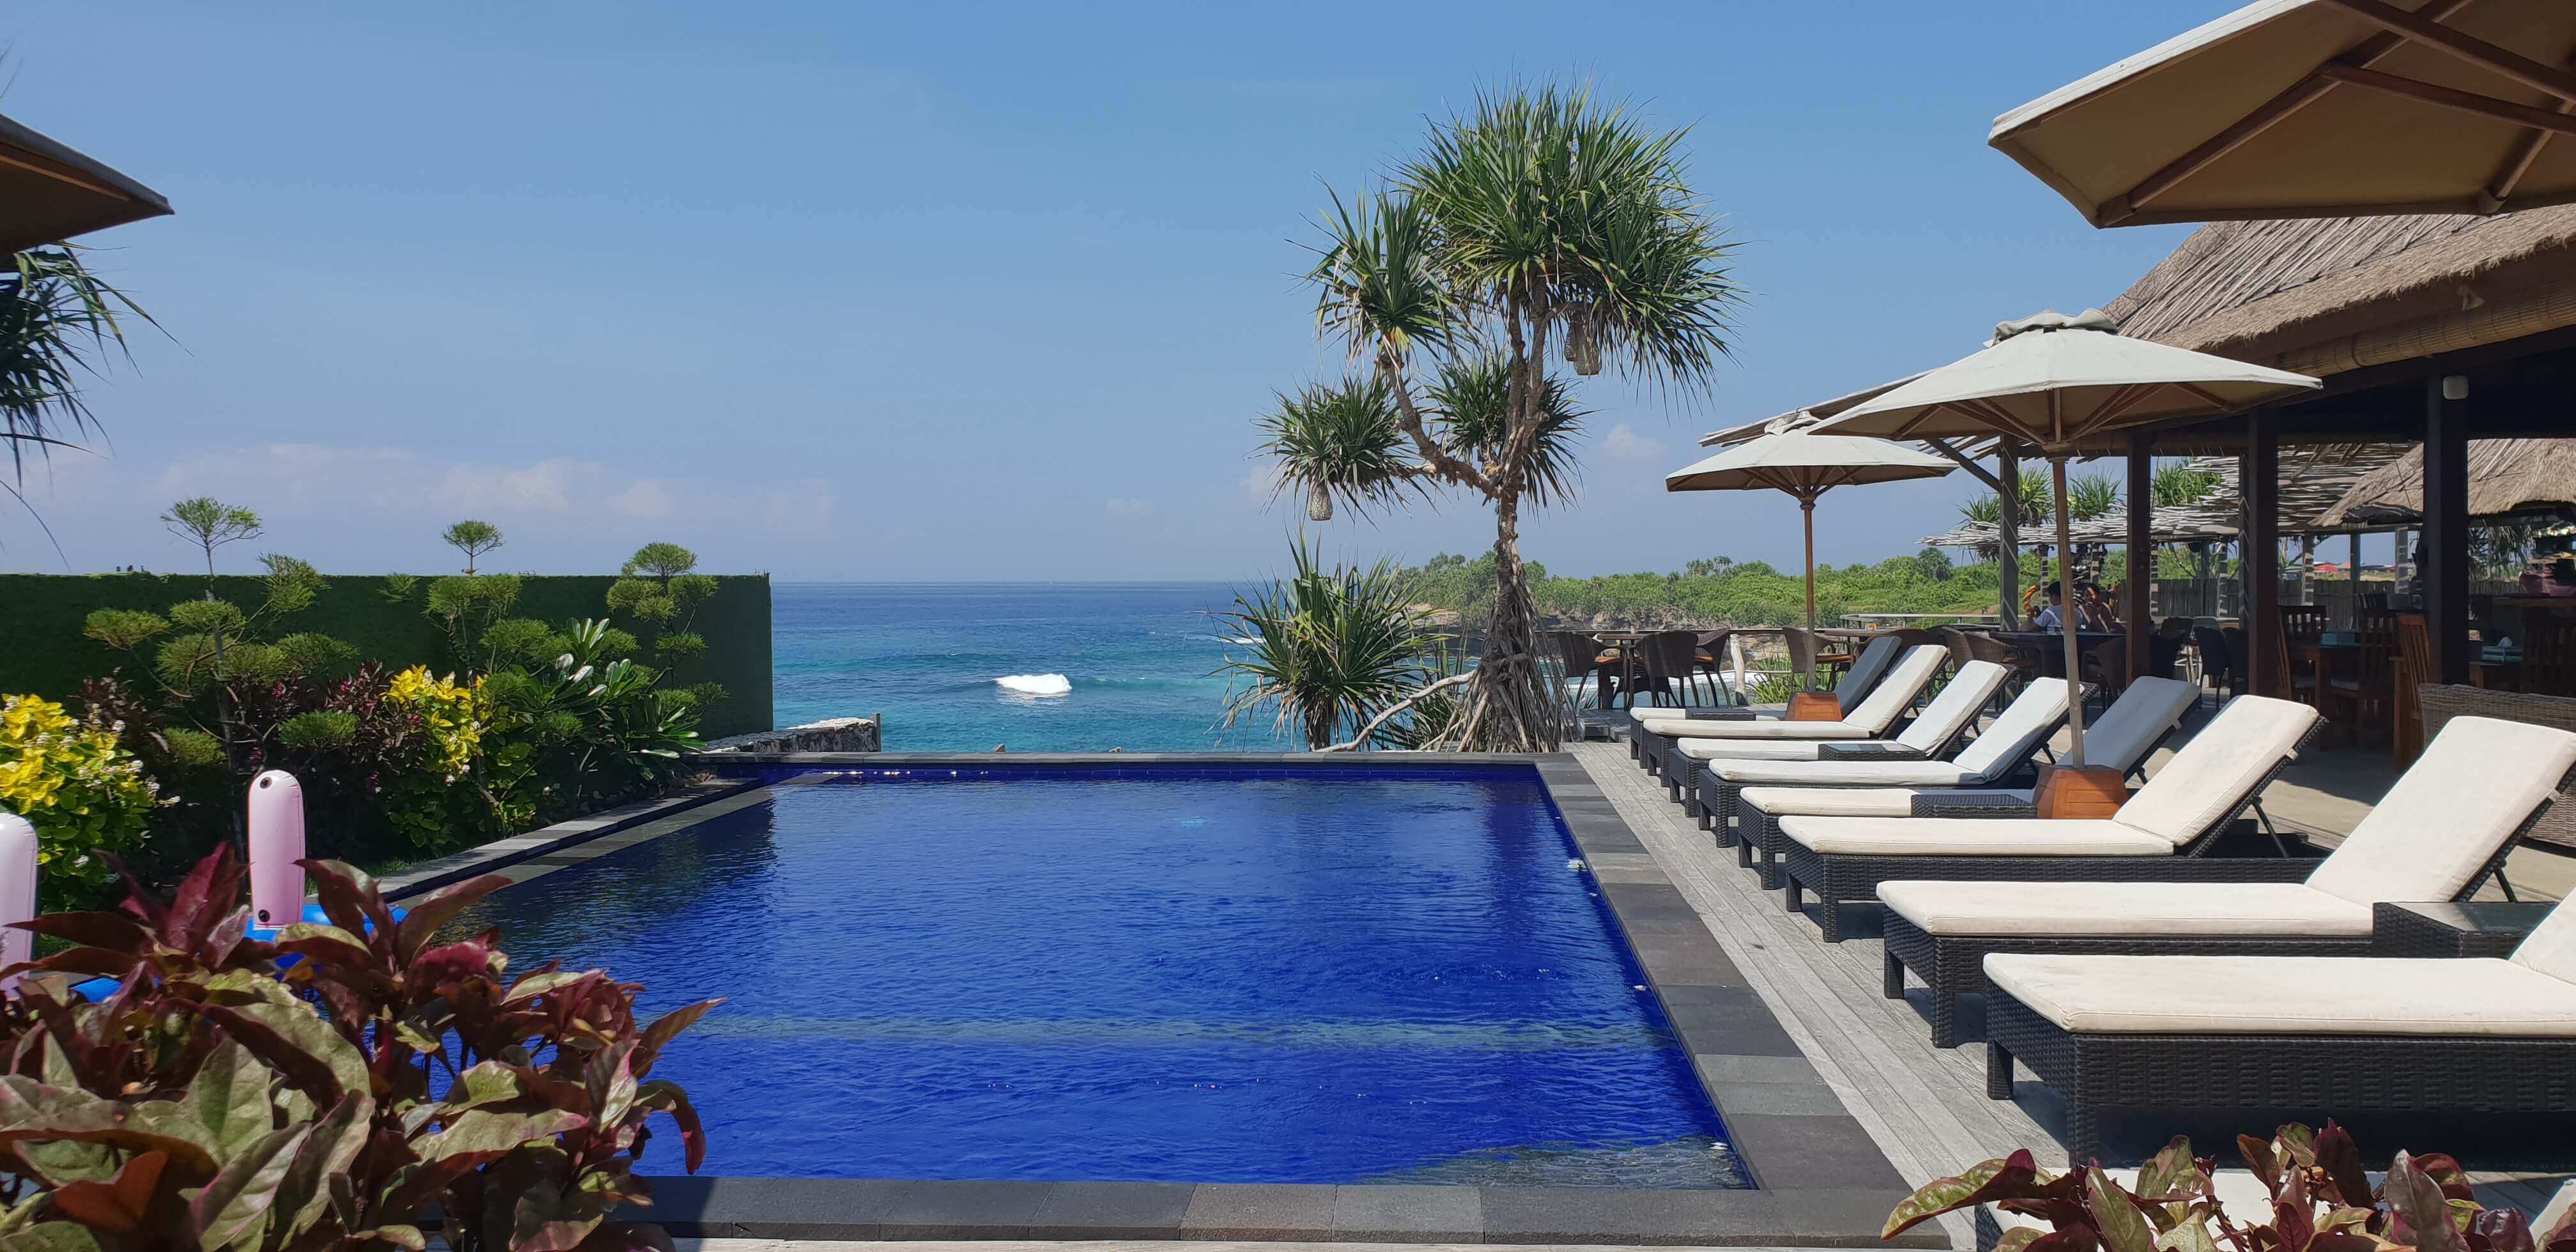 Chilling in the outdoor pool overlooking the Indian Ocean is one of the most relaxing things to do in Nusa Lembongan